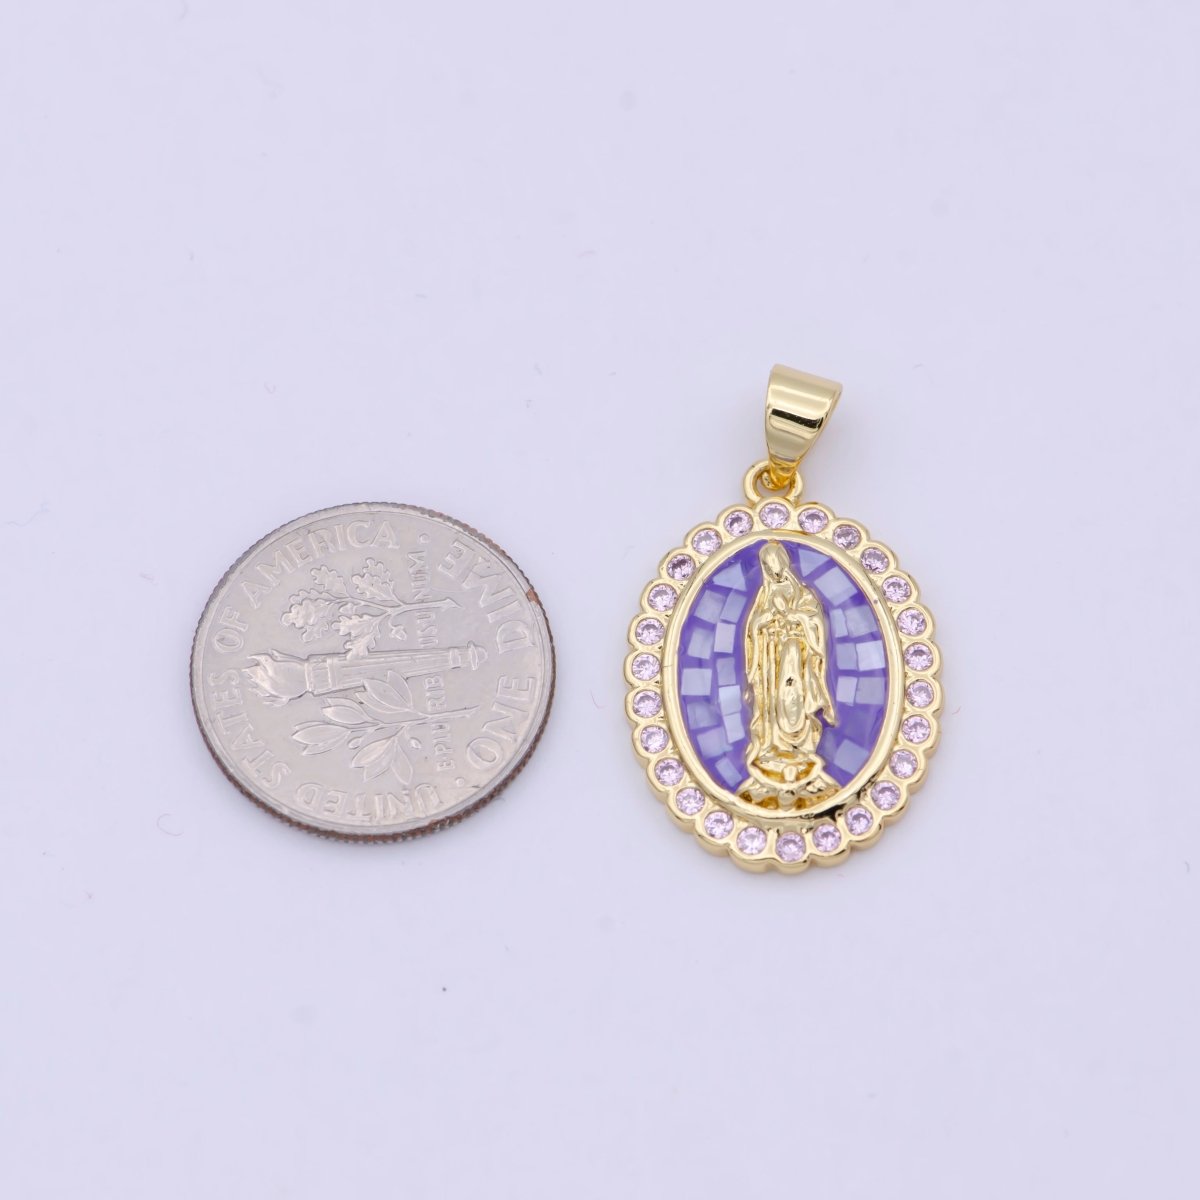 Purple Opal Miraculous Lady Charm for Necklace, Dainty Lady of Guadalupe Pendant for Religious Jewelry Making Supply in Gold Filled N-621 - DLUXCA